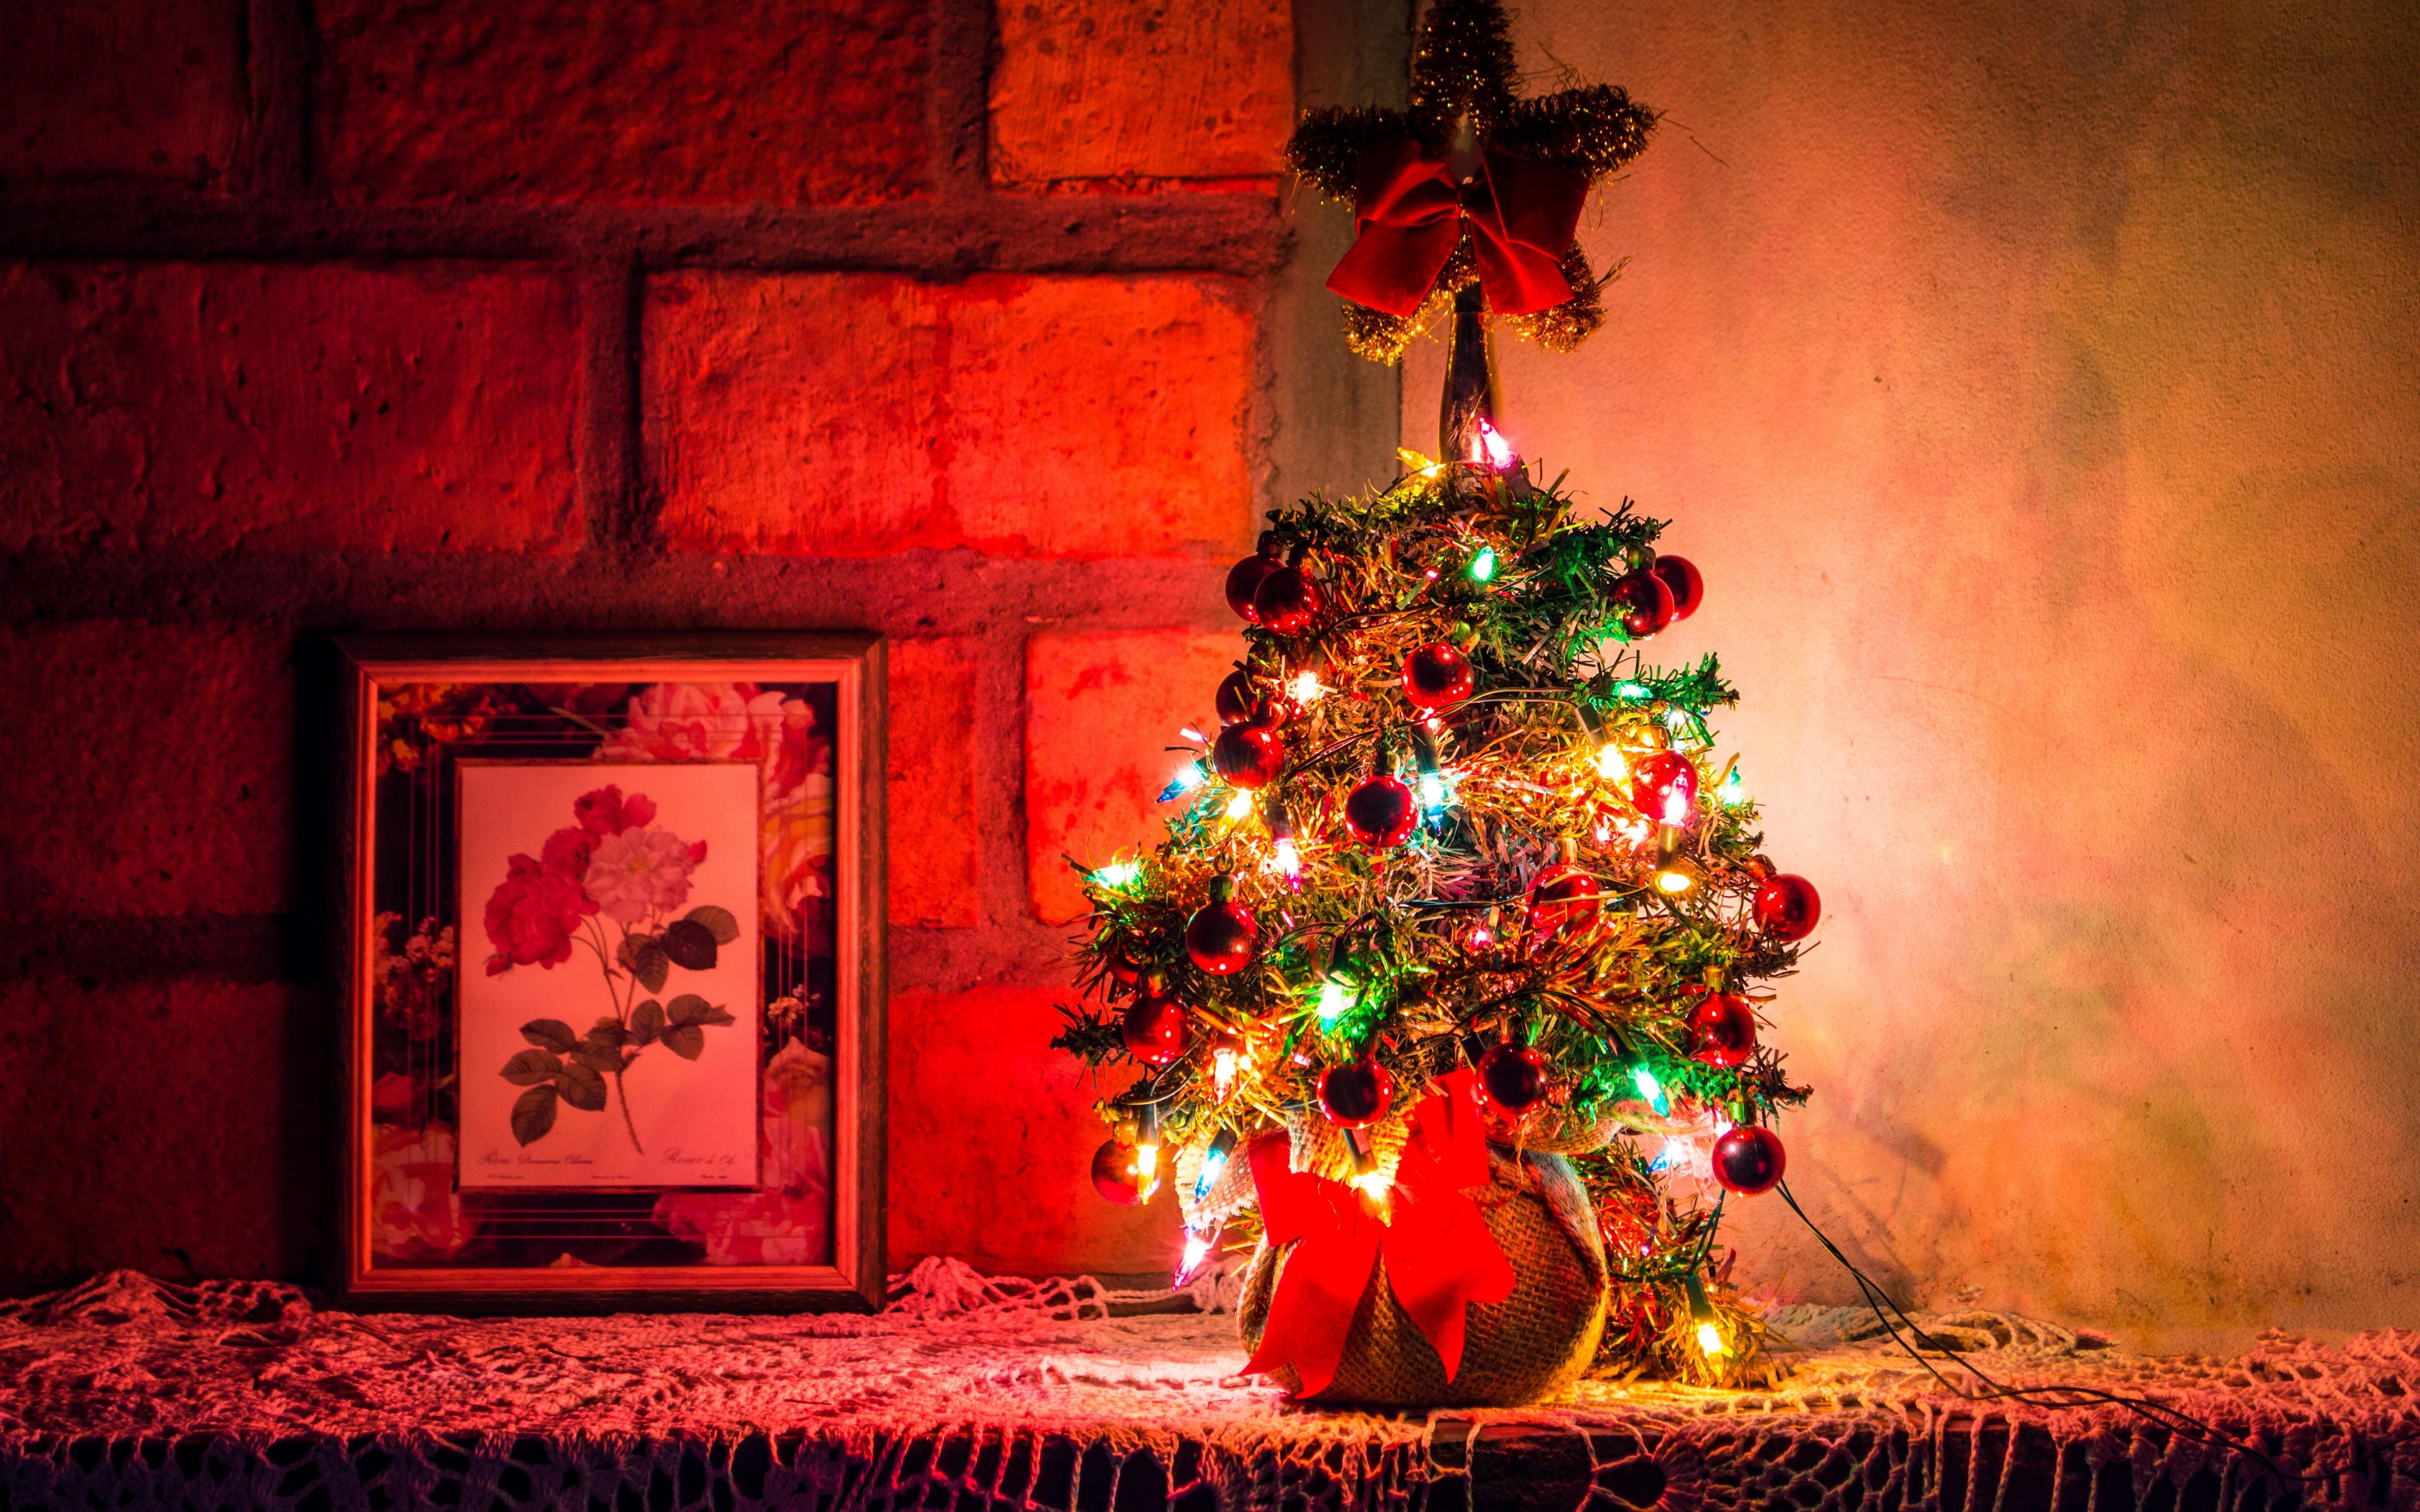 Download wallpaper 3840x2400 christmas tree, new year